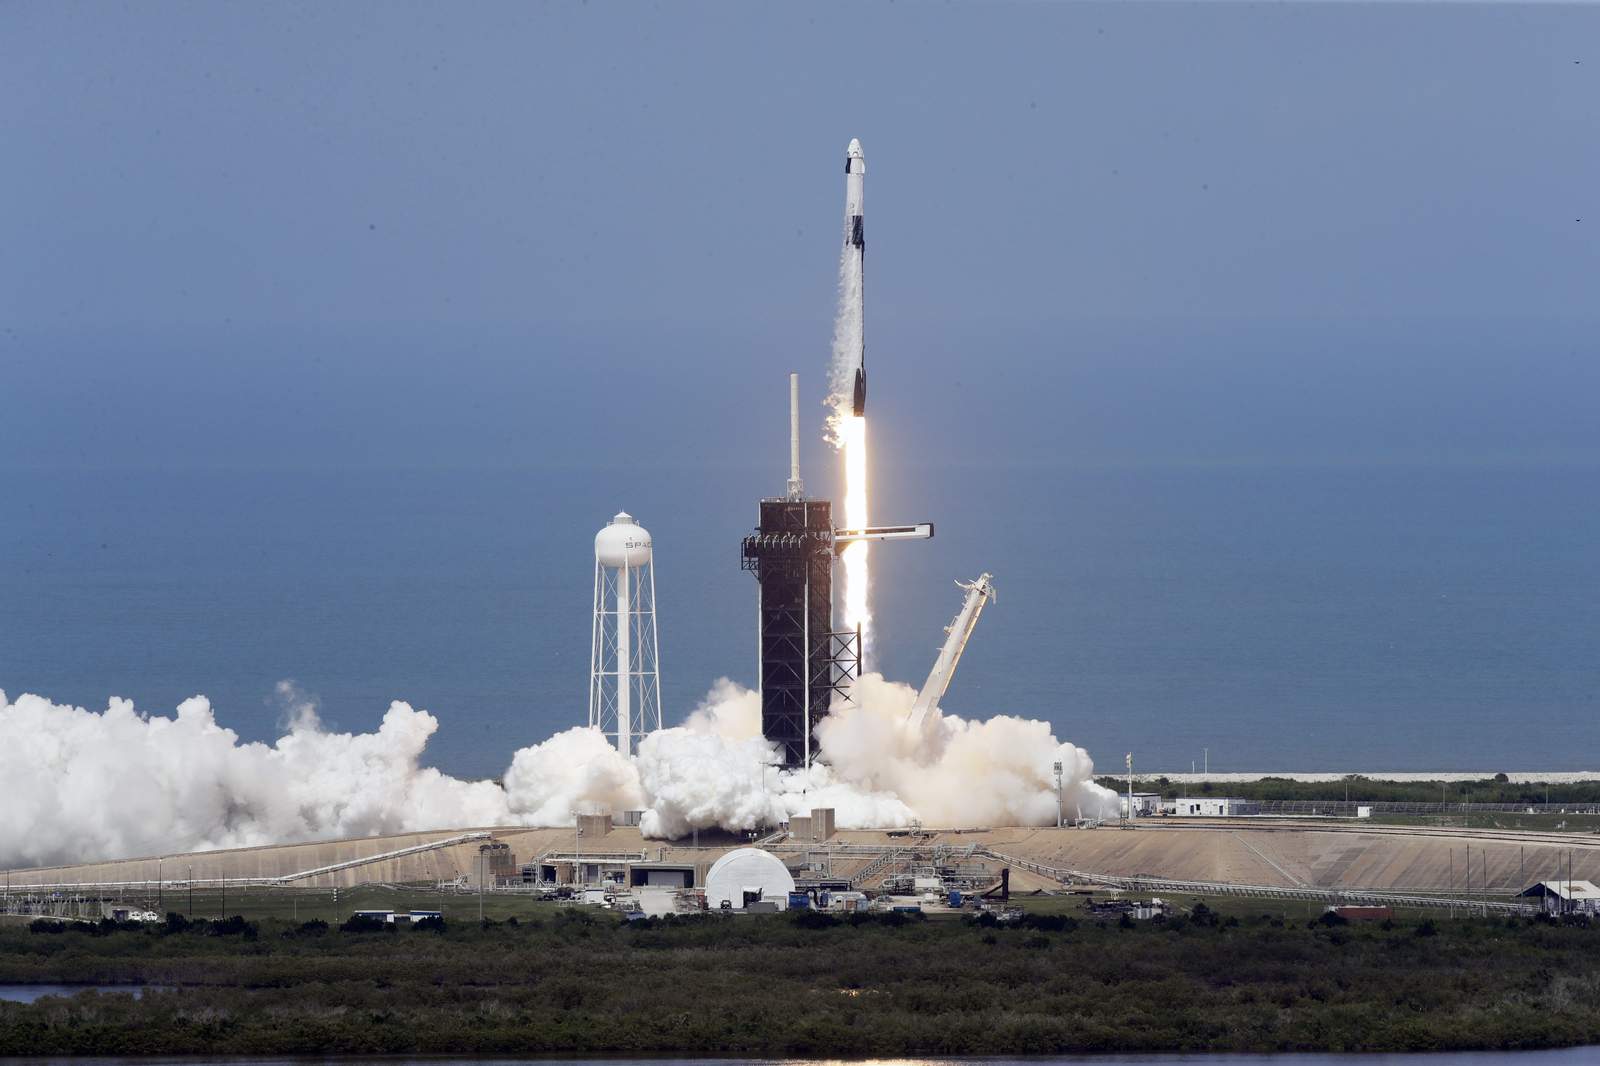 Launch day: A timeline leading up to SpaceX’s Dragon launch with astronauts